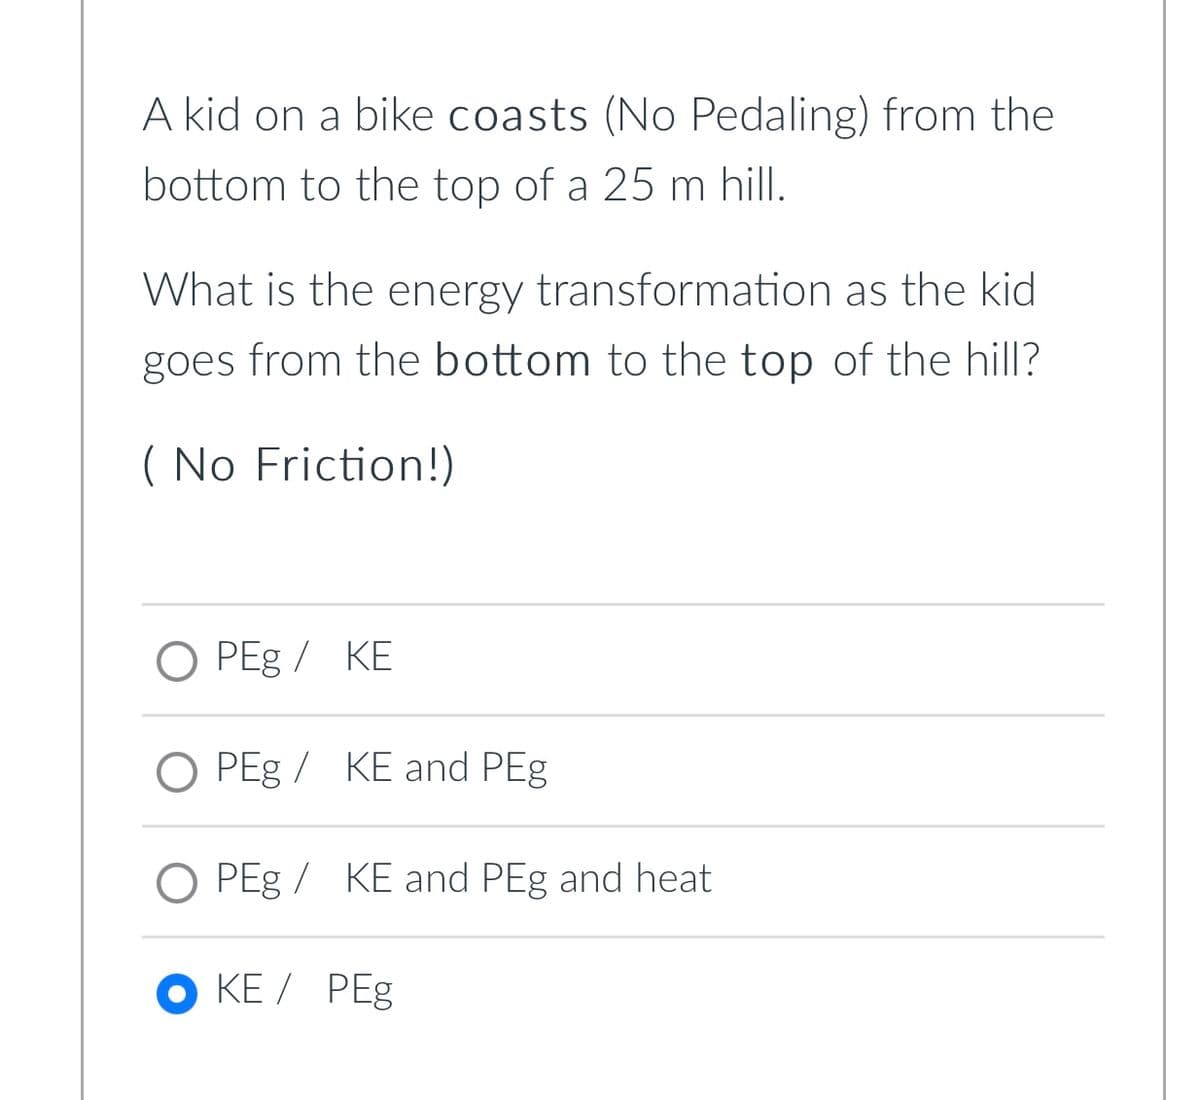 A kid on a bike coasts (No Pedaling) from the
bottom to the top of a 25 m hill.
What is the energy transformation as the kid
goes from the bottom to the top of the hill?
( No Friction!)
O PEg / KE
O PEg / KE and PEg
O PEg /
KE and PEg and heat
OKE / PEg